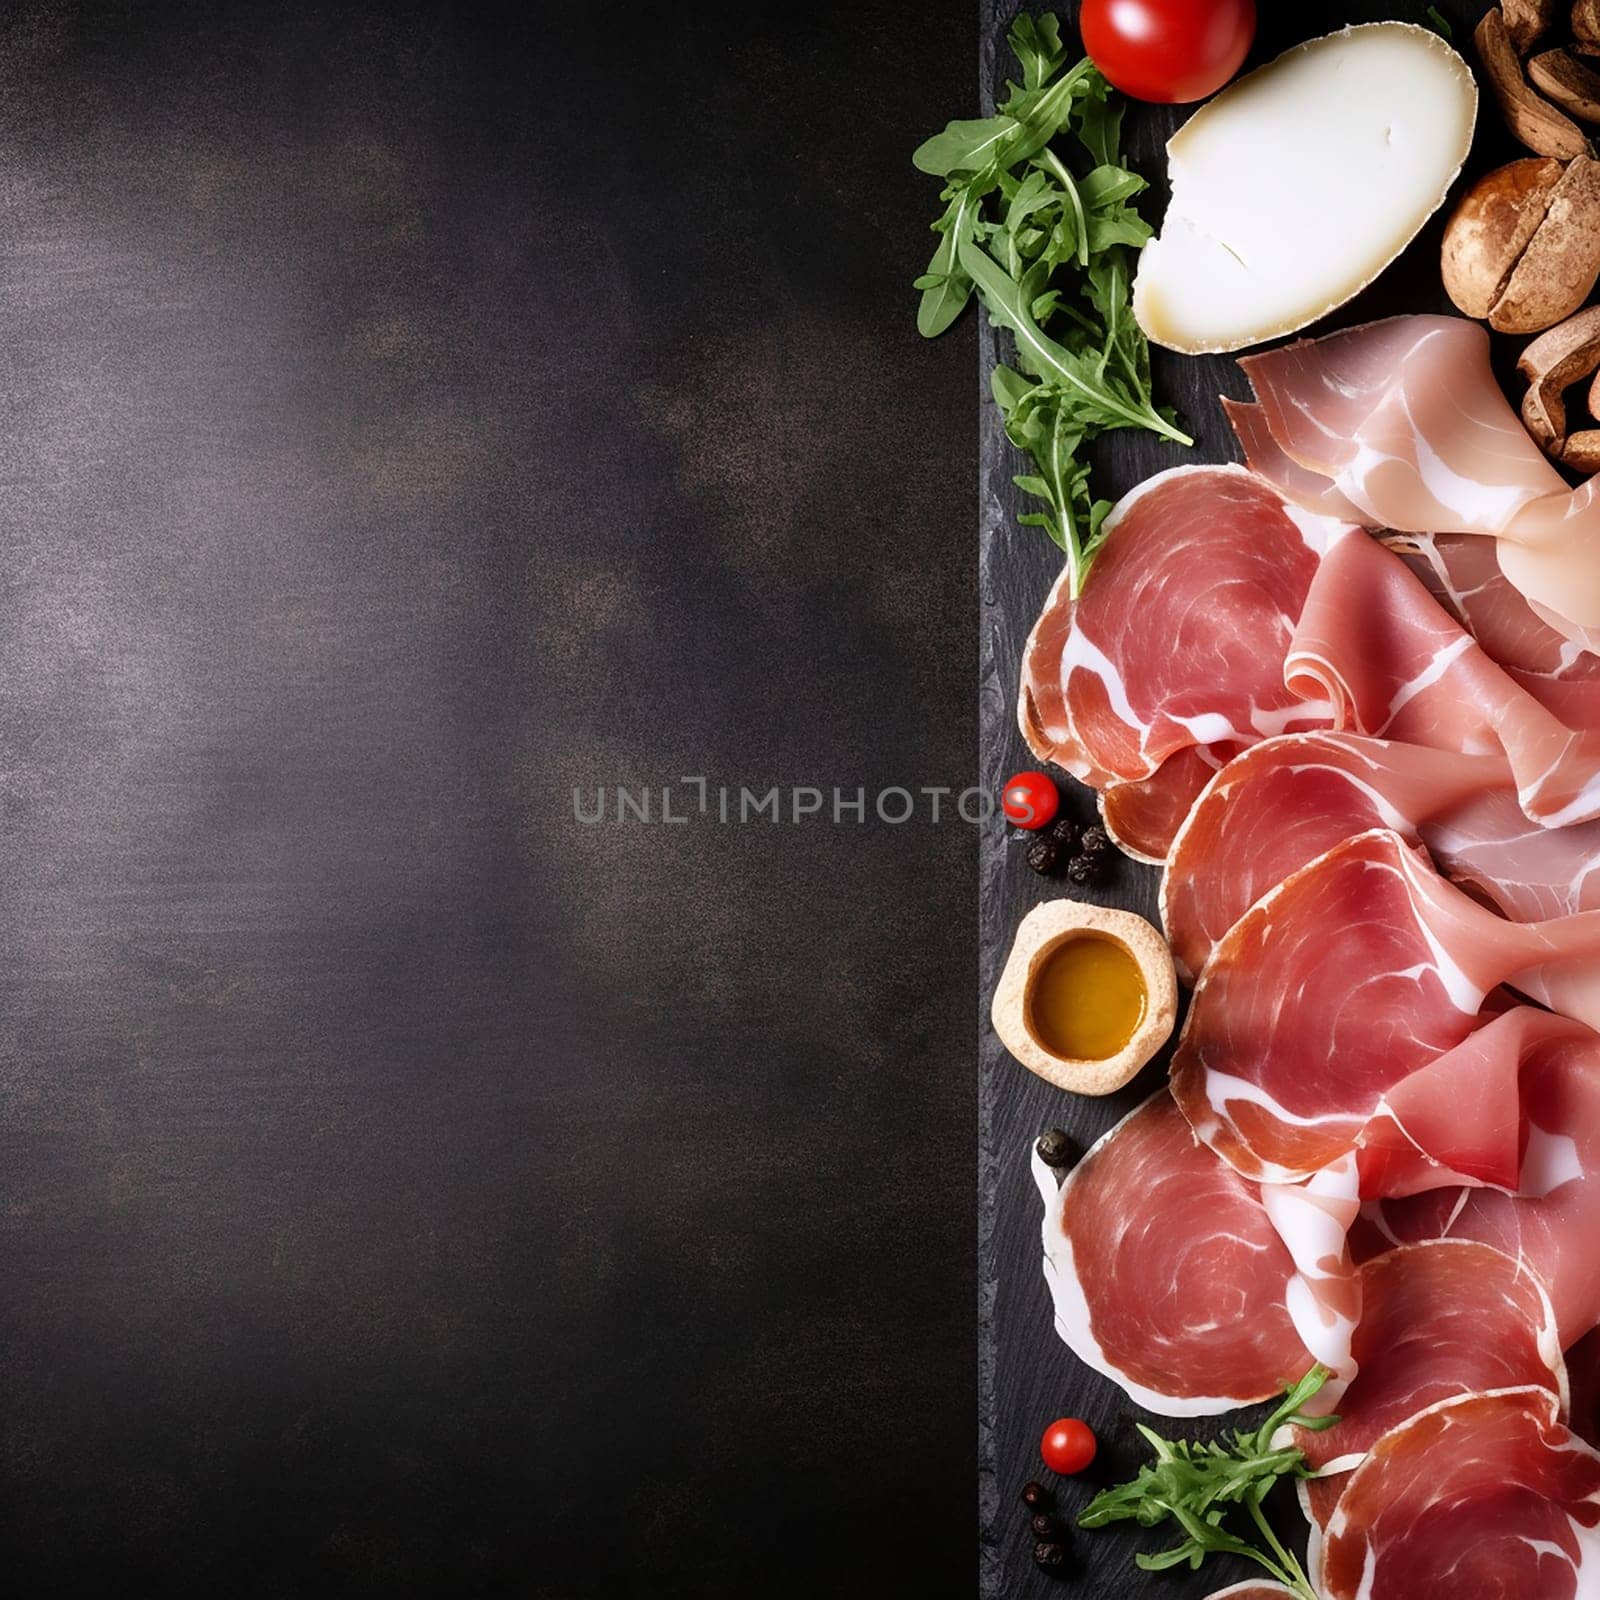 Assorted deli meats with vegetables and condiments on slate backdrop.